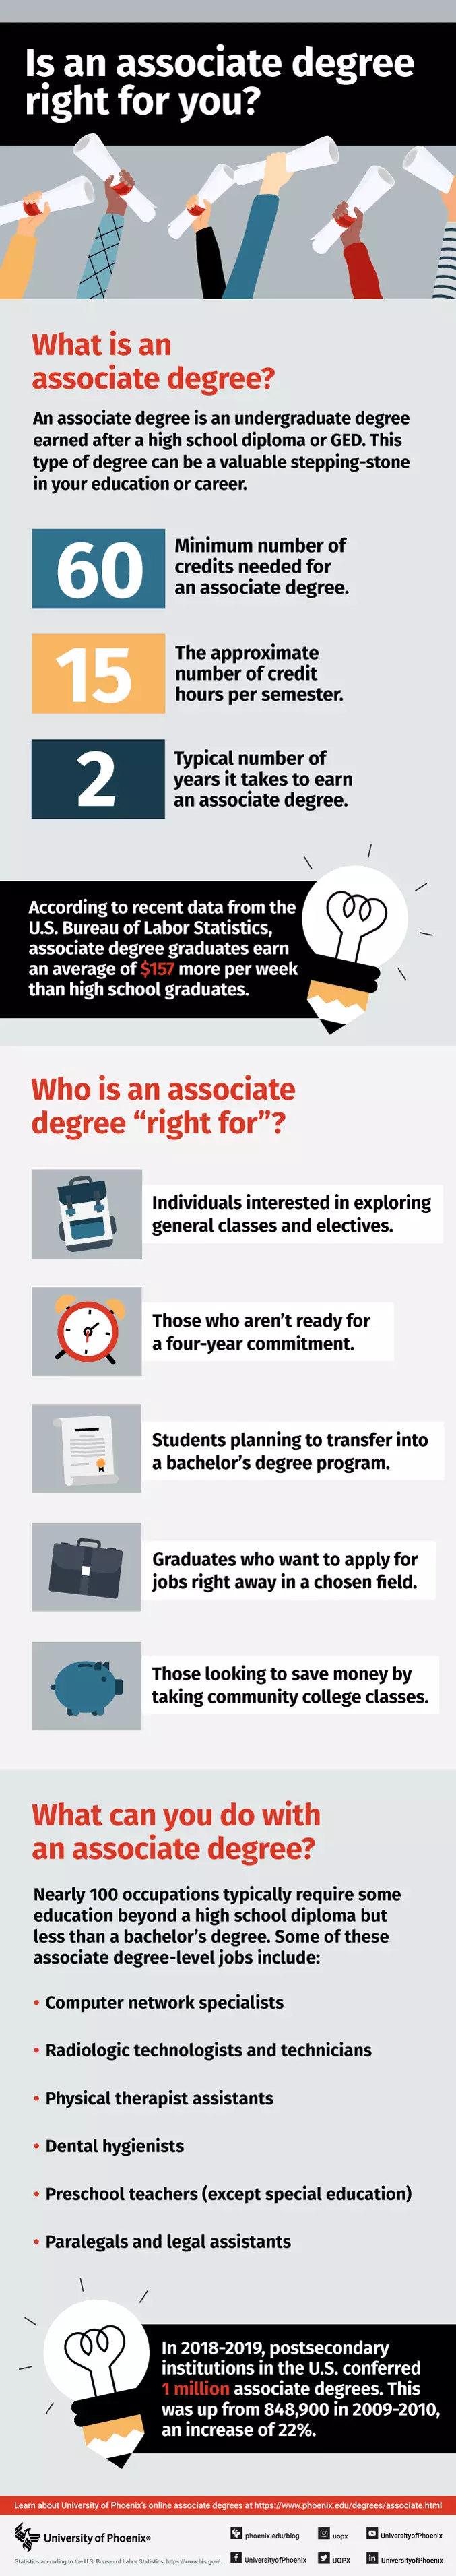 Is an associate degree right for you infographic